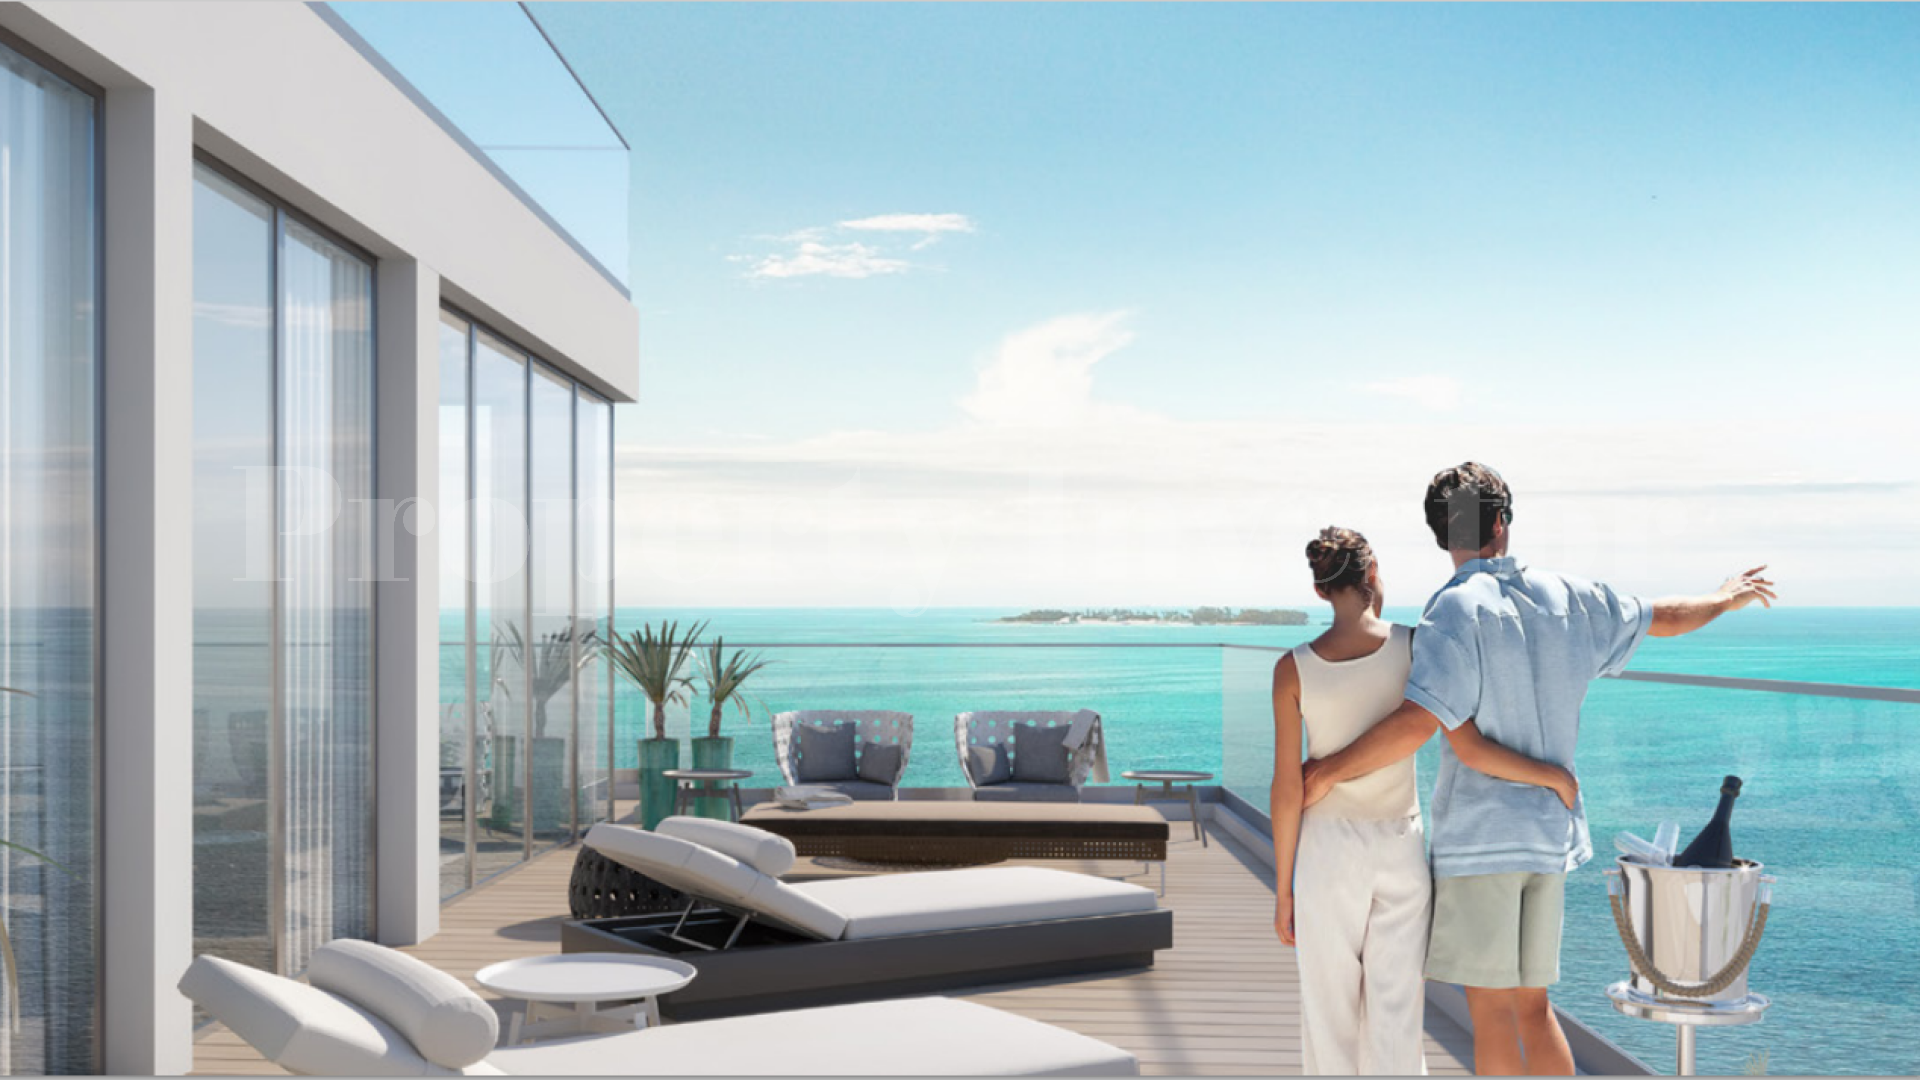 3 Bedroom Condo-Hotel Penthouse Residence in the Bahamas (Residence 604)